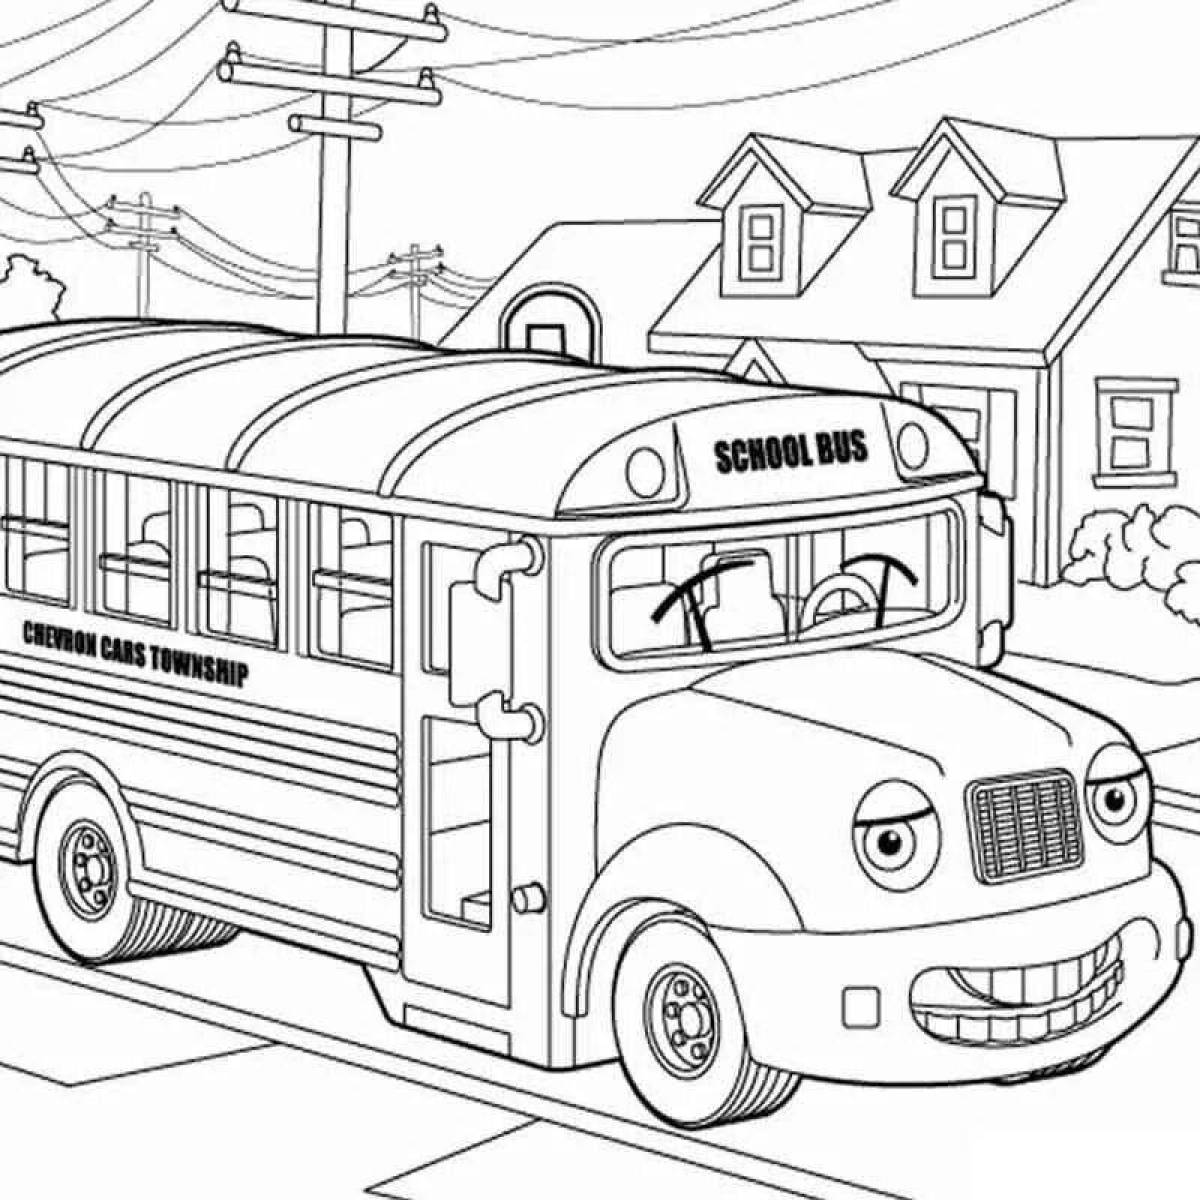 Ammobus coloring page